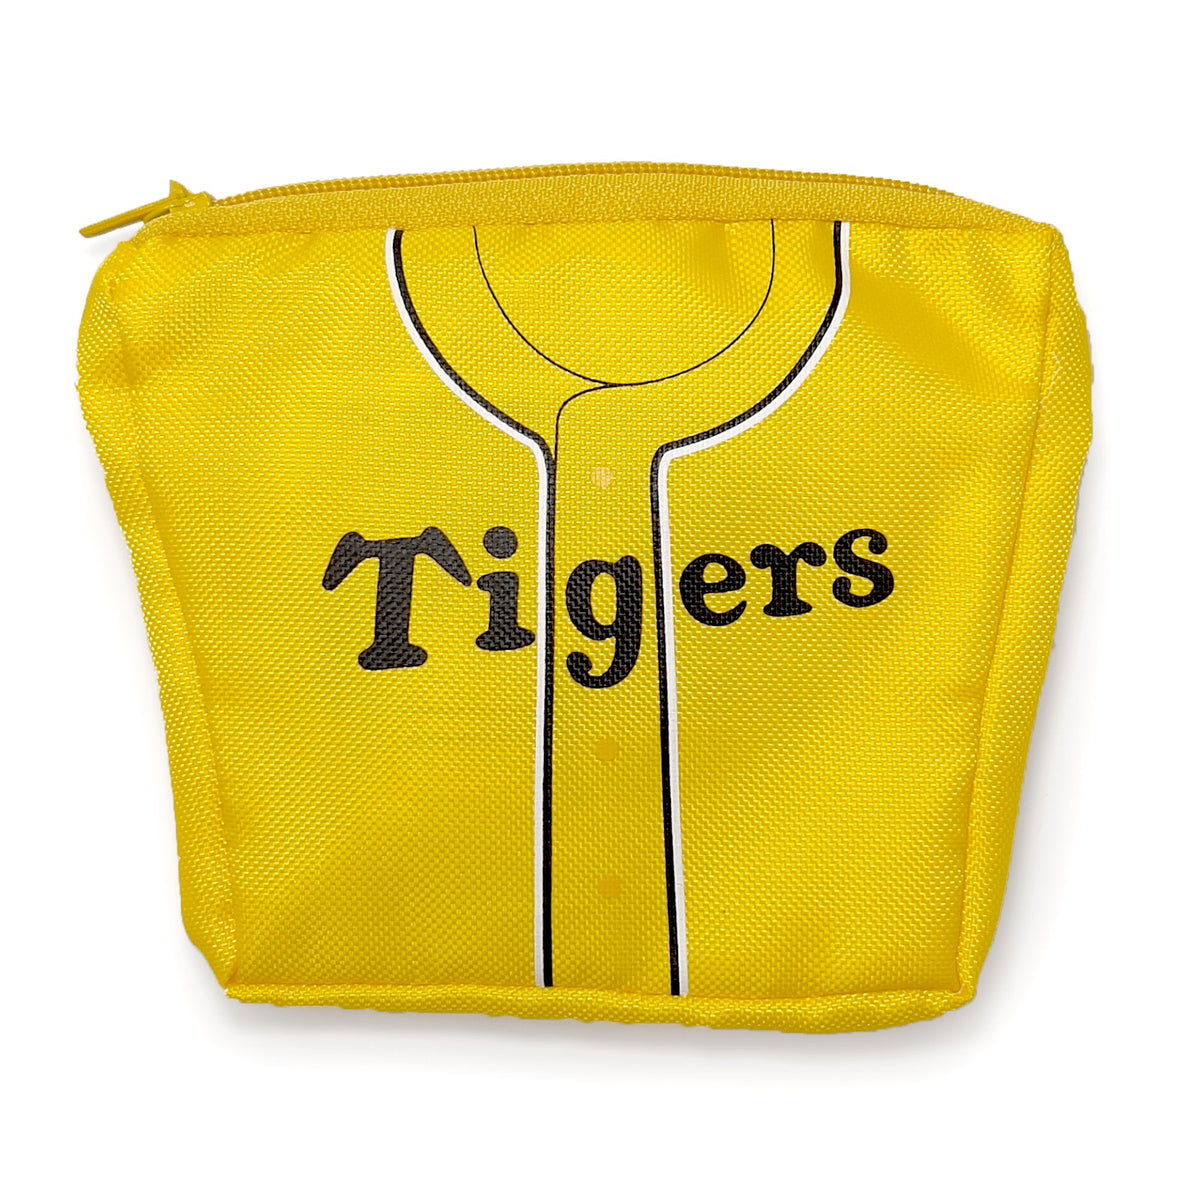 Official Hanshin Tigers Fan Club Limited Edition Accessory Zipper Pouch 2003 - Sugoi JDM